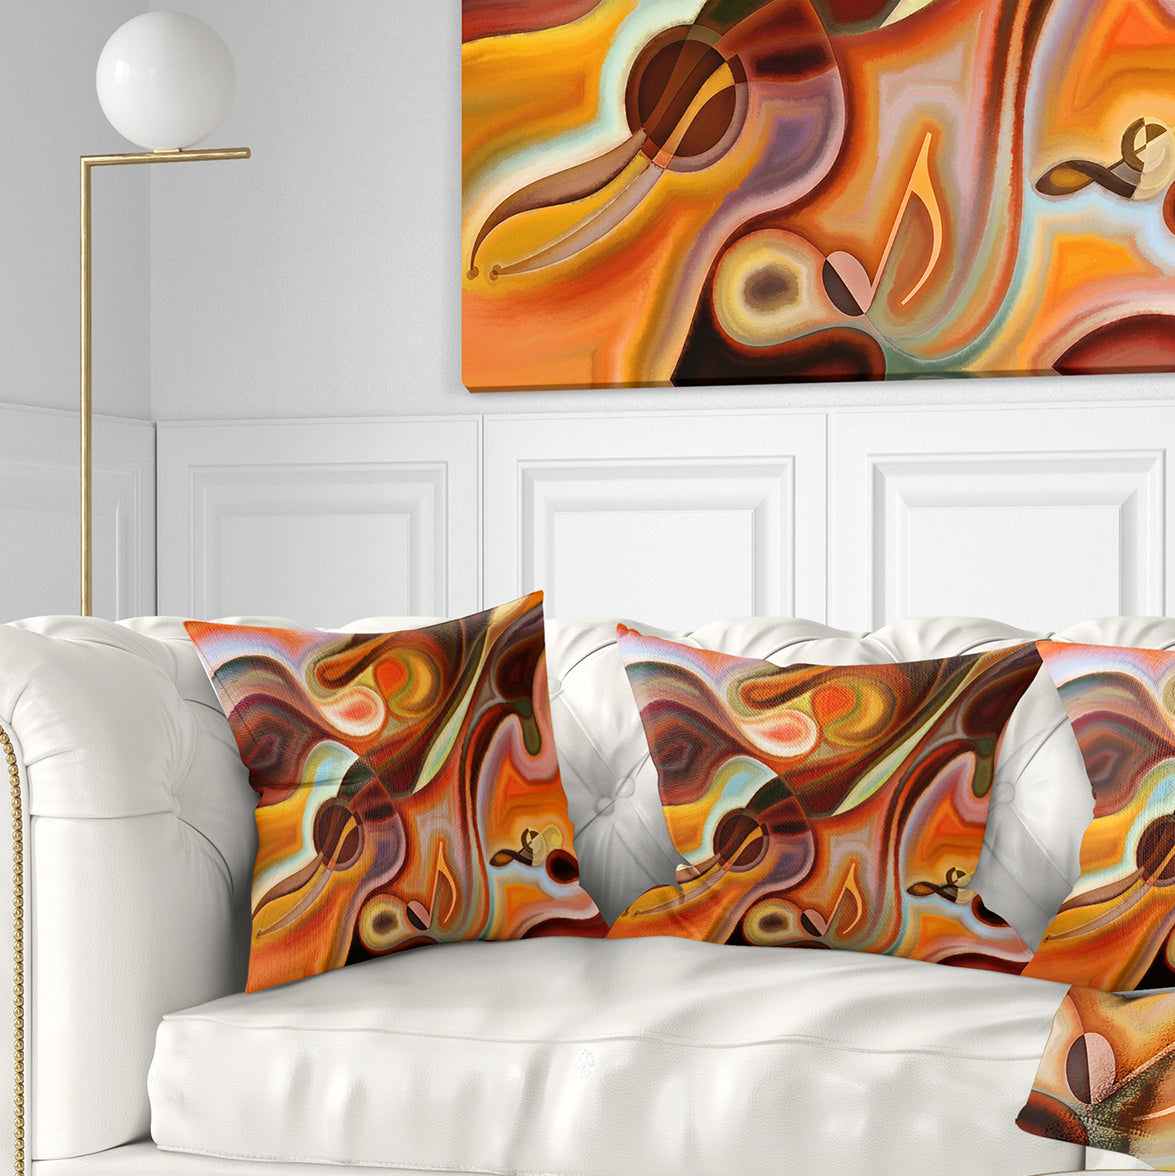 Music Dreams - Abstract Throw Pillow